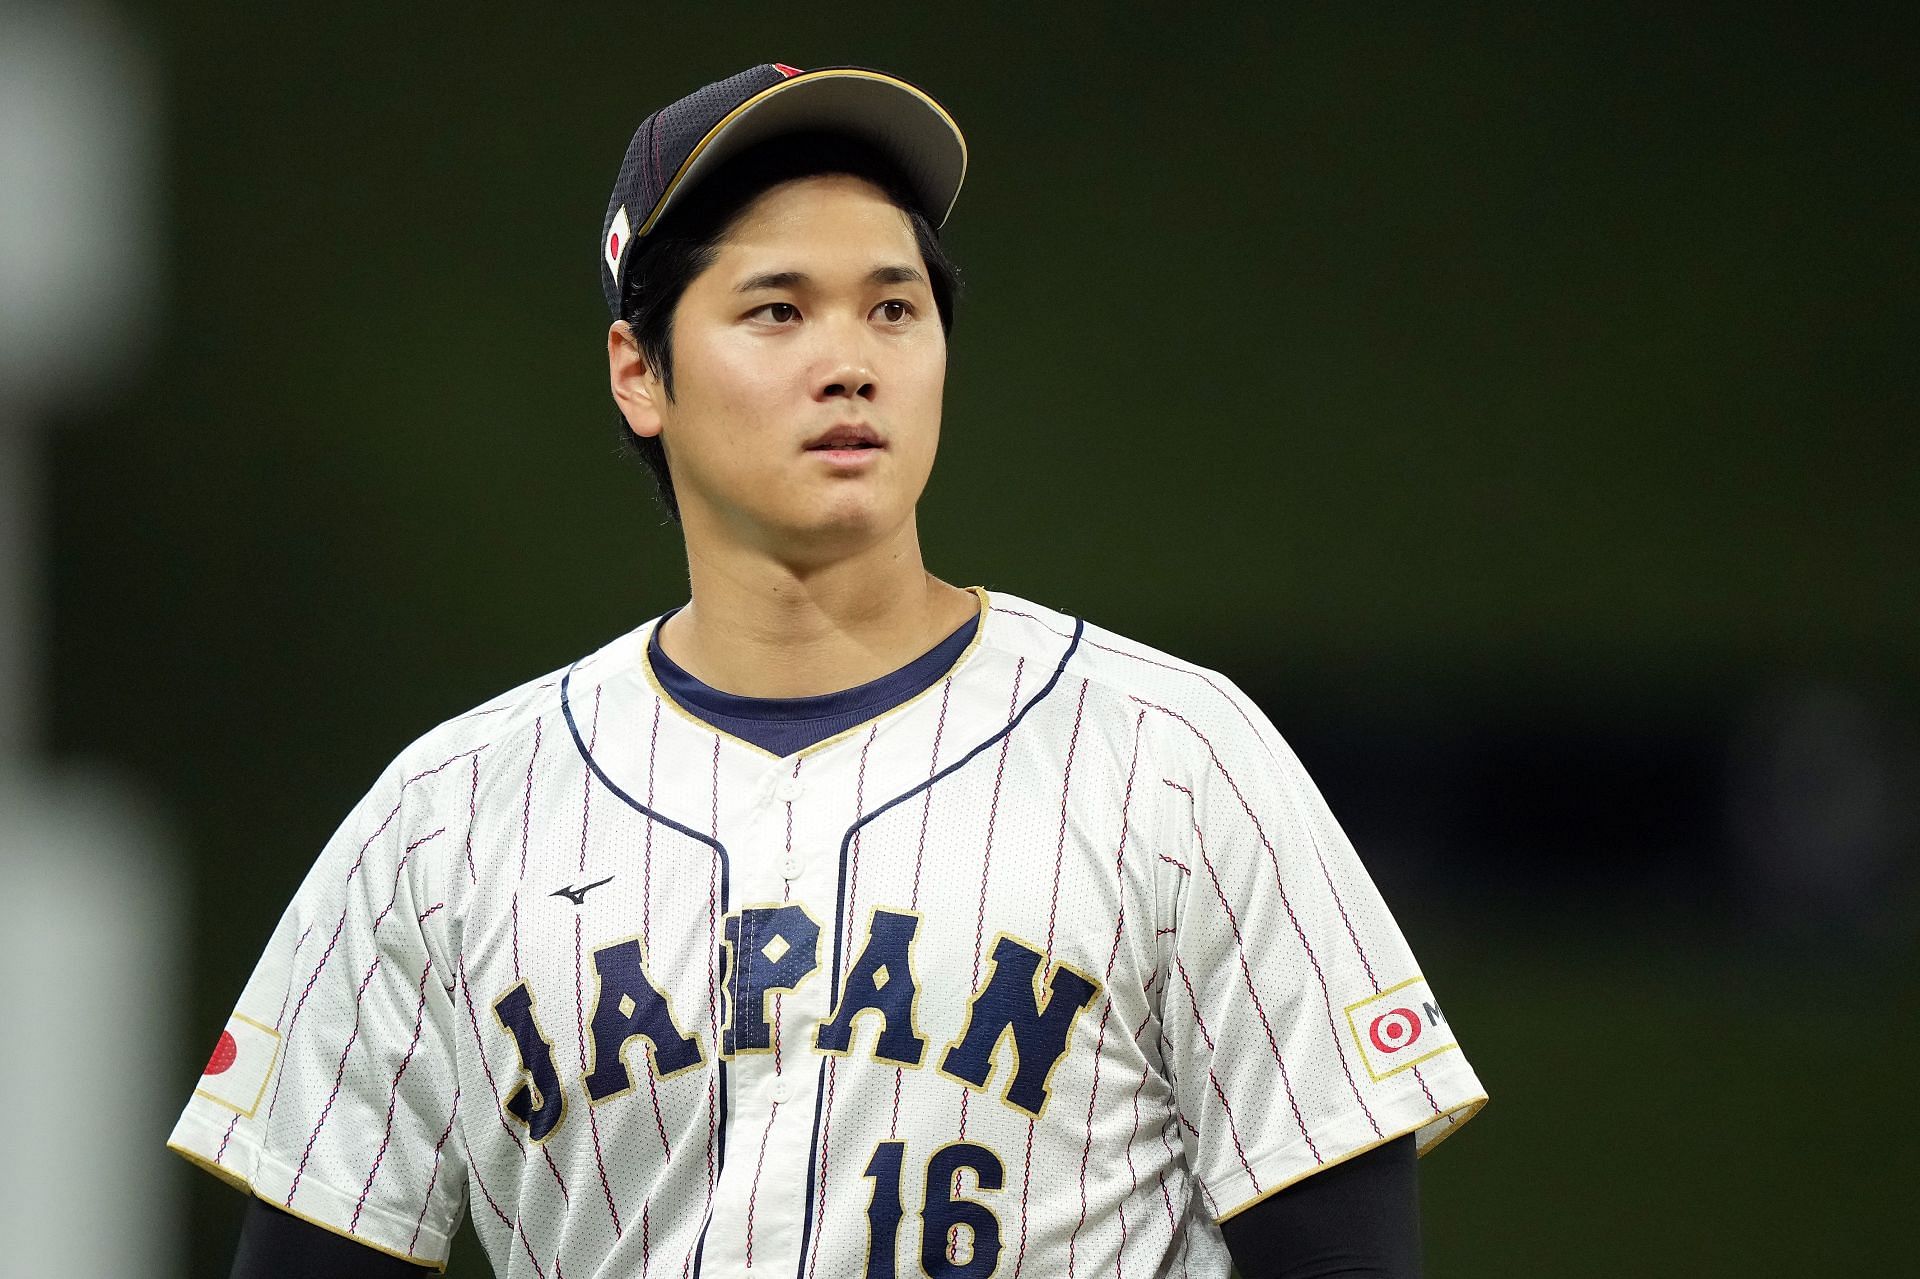 Shohei Ohtani says he plans to hit, pitch in relief in WBC final